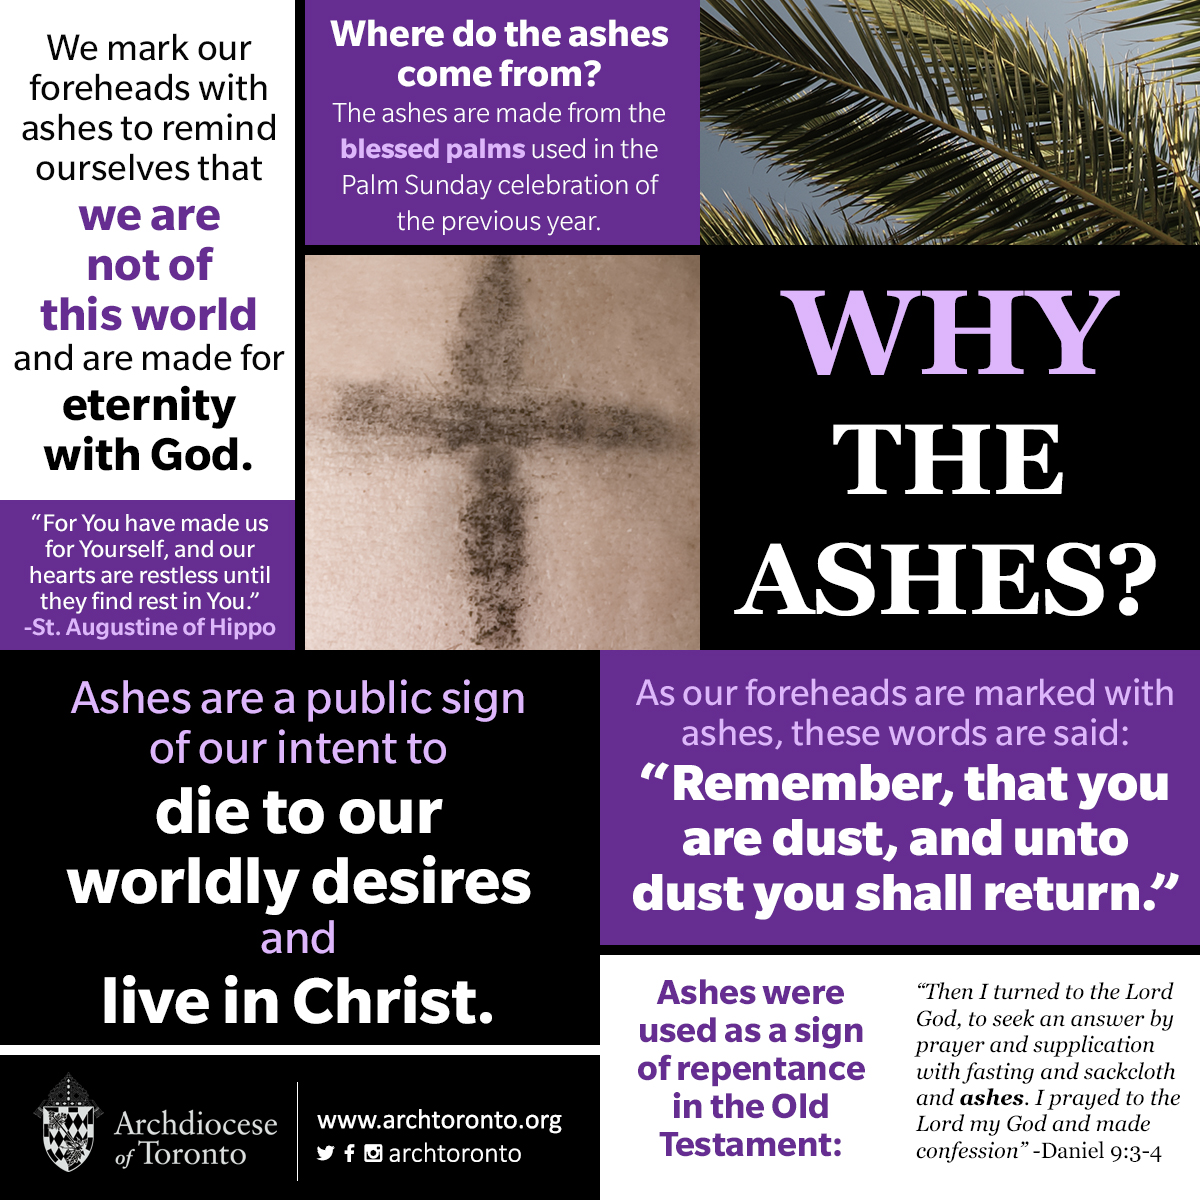 Infographic: Why the ashes?